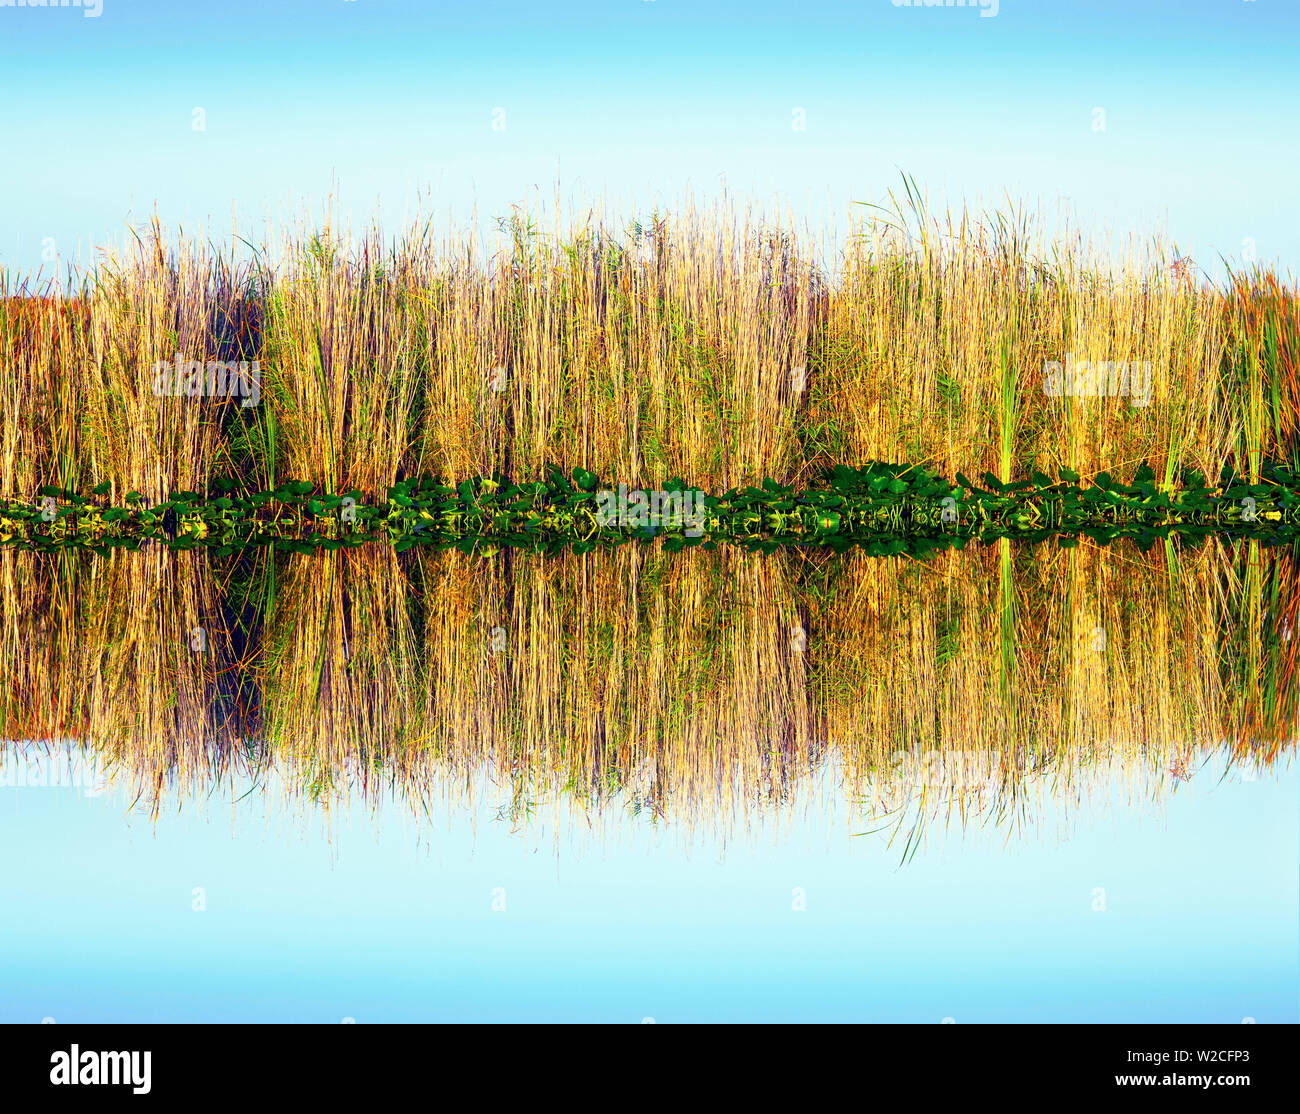 Florida, Everglades National Park, Sawgrass Reflection, Abundant In the Wet Marshes, Can Grow Up To Nine Feet Tall, Everglades Is Referred To As A Sawgrass Praire And A River Of Grass Stock Photo